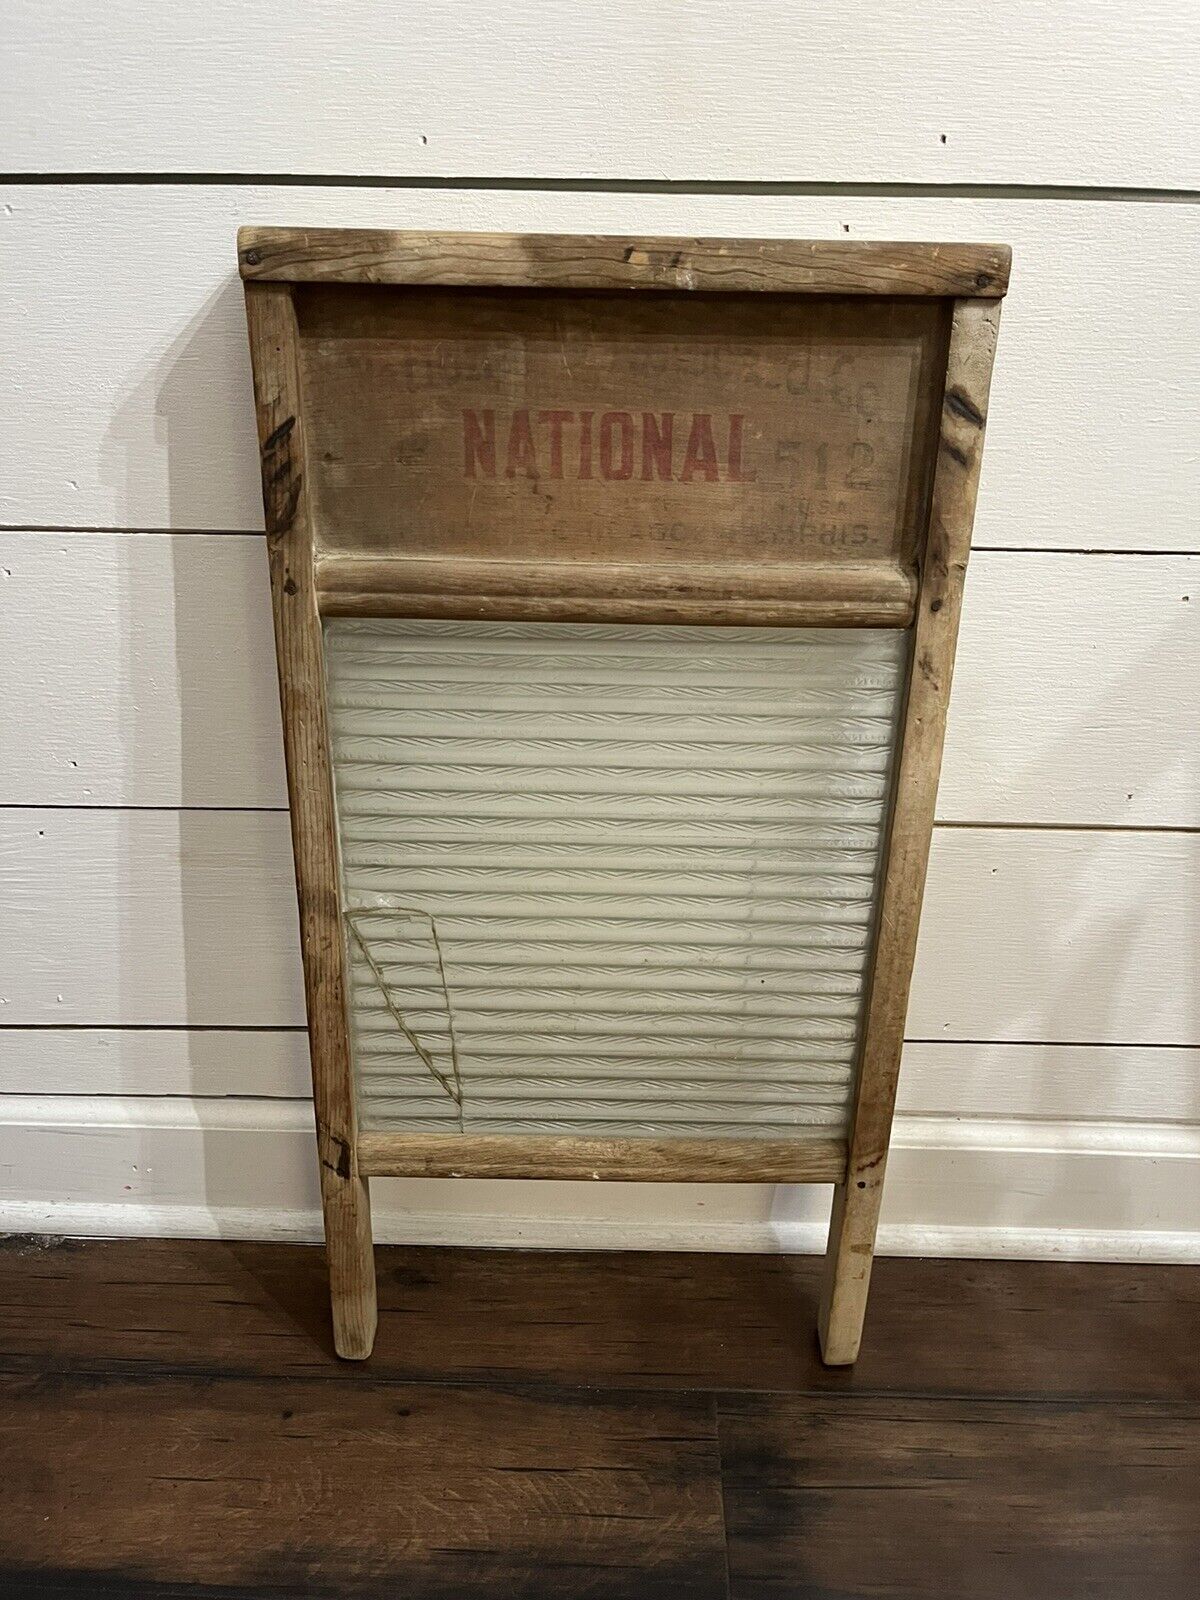 Vintage National Washboard Co. No. 512 Washboard with Glass Made In USA 